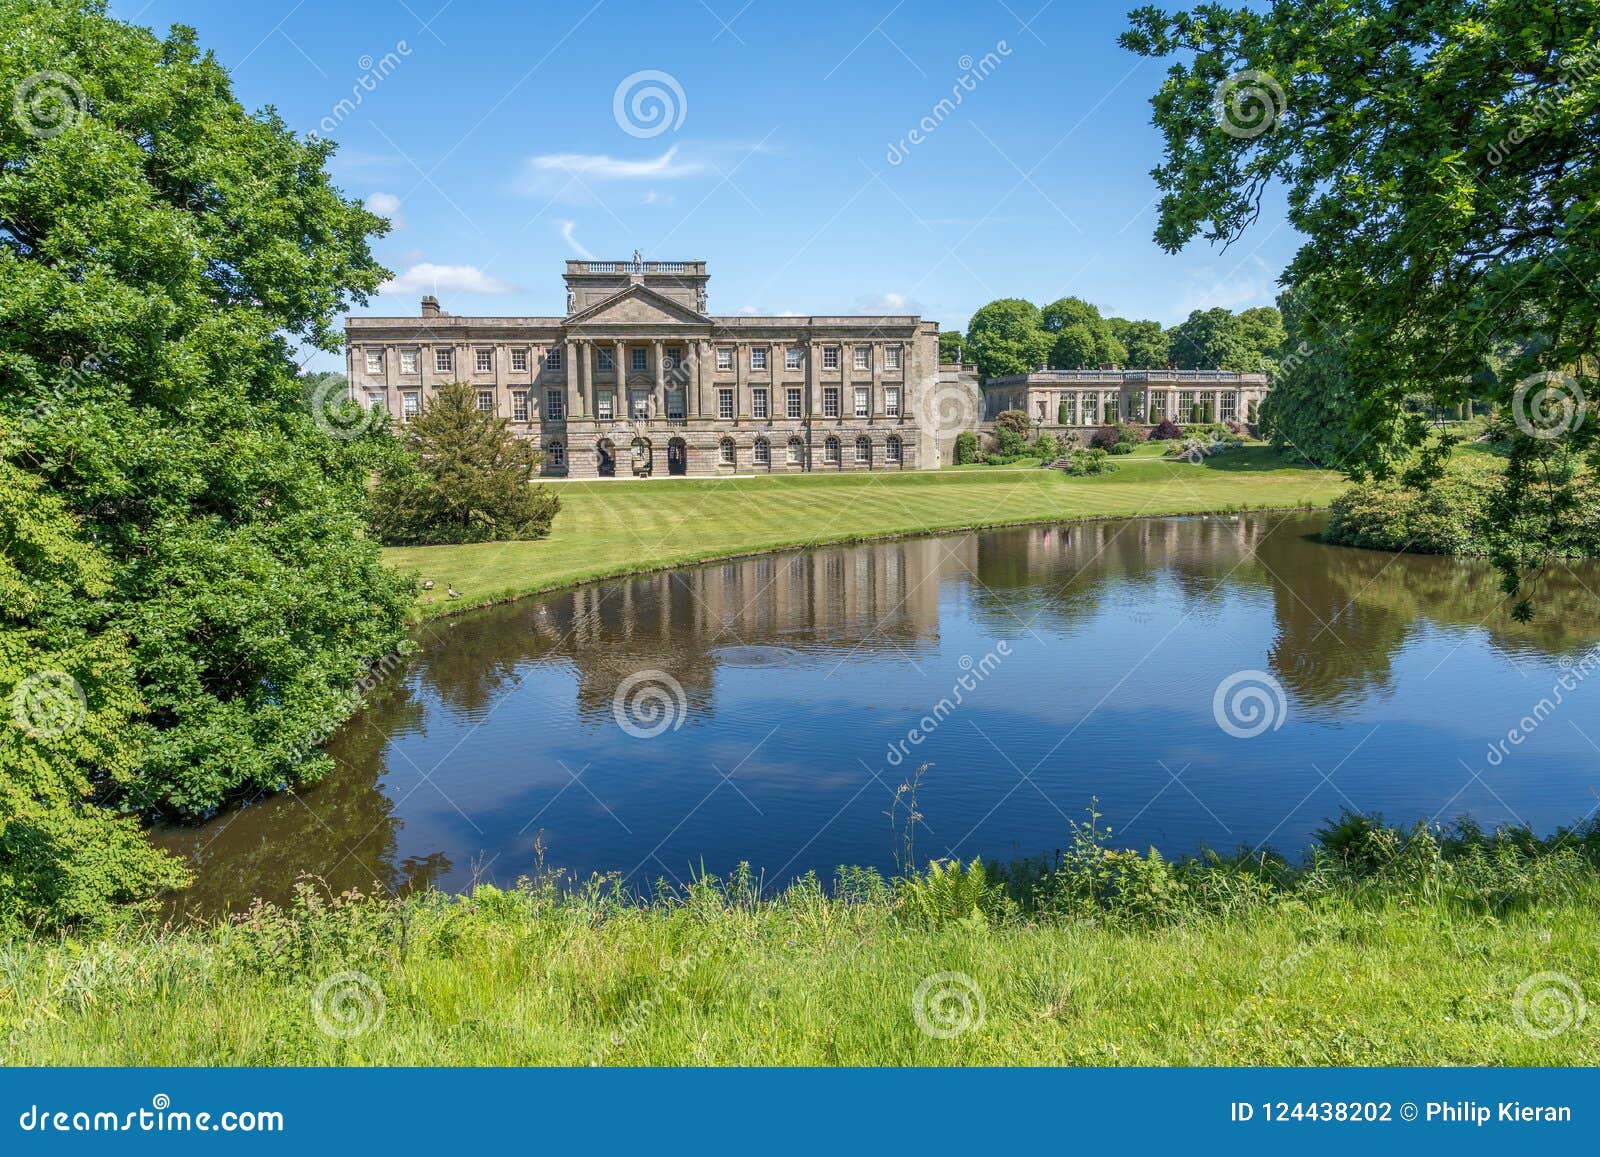 lyme house at lyme park cheshire